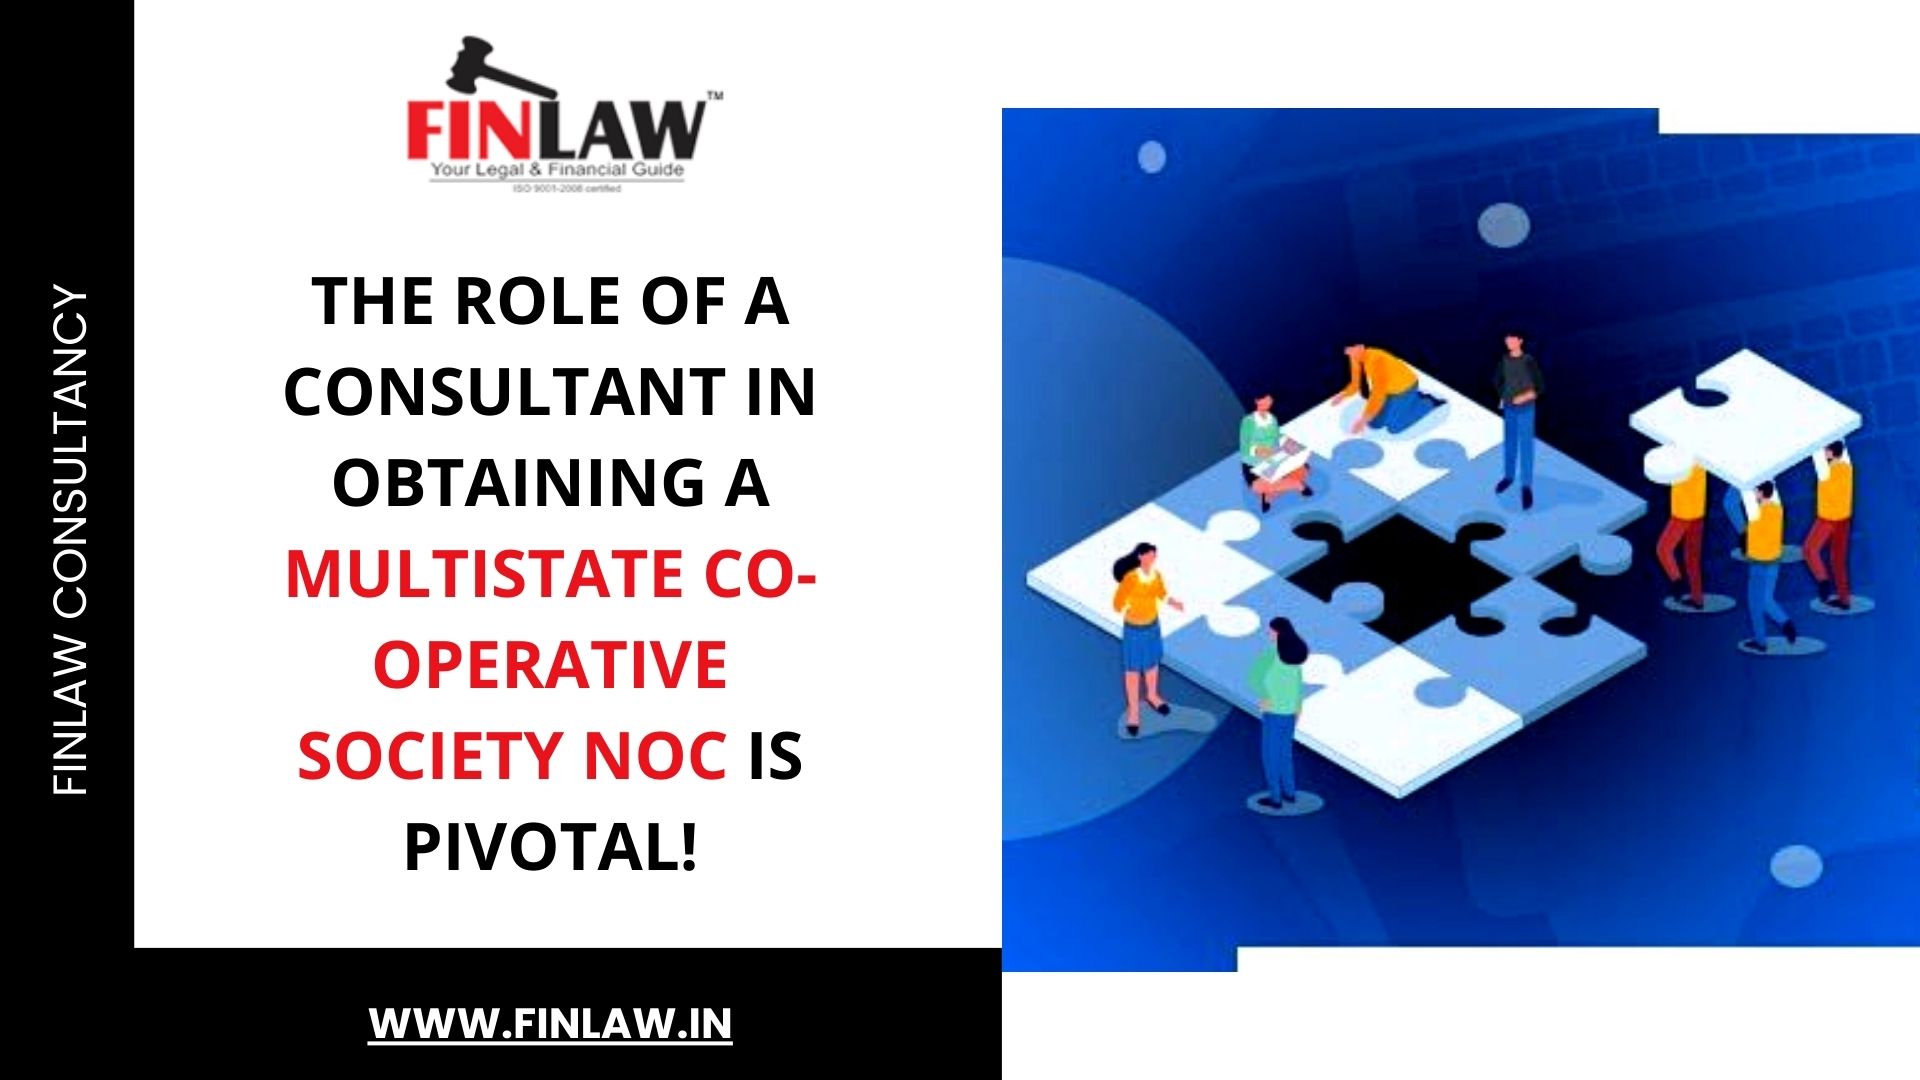 The role of a consultant in obtaining a Multistate Co-operative Society NOC is pivotal!